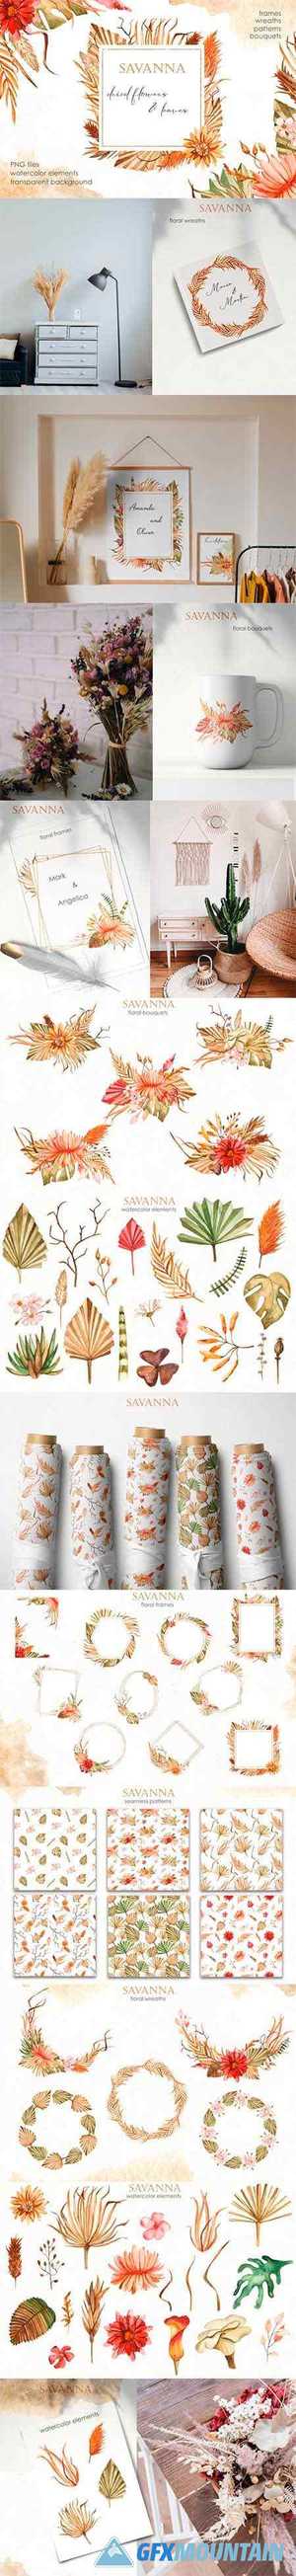 Watercolor Savanna dried flowers and leaves